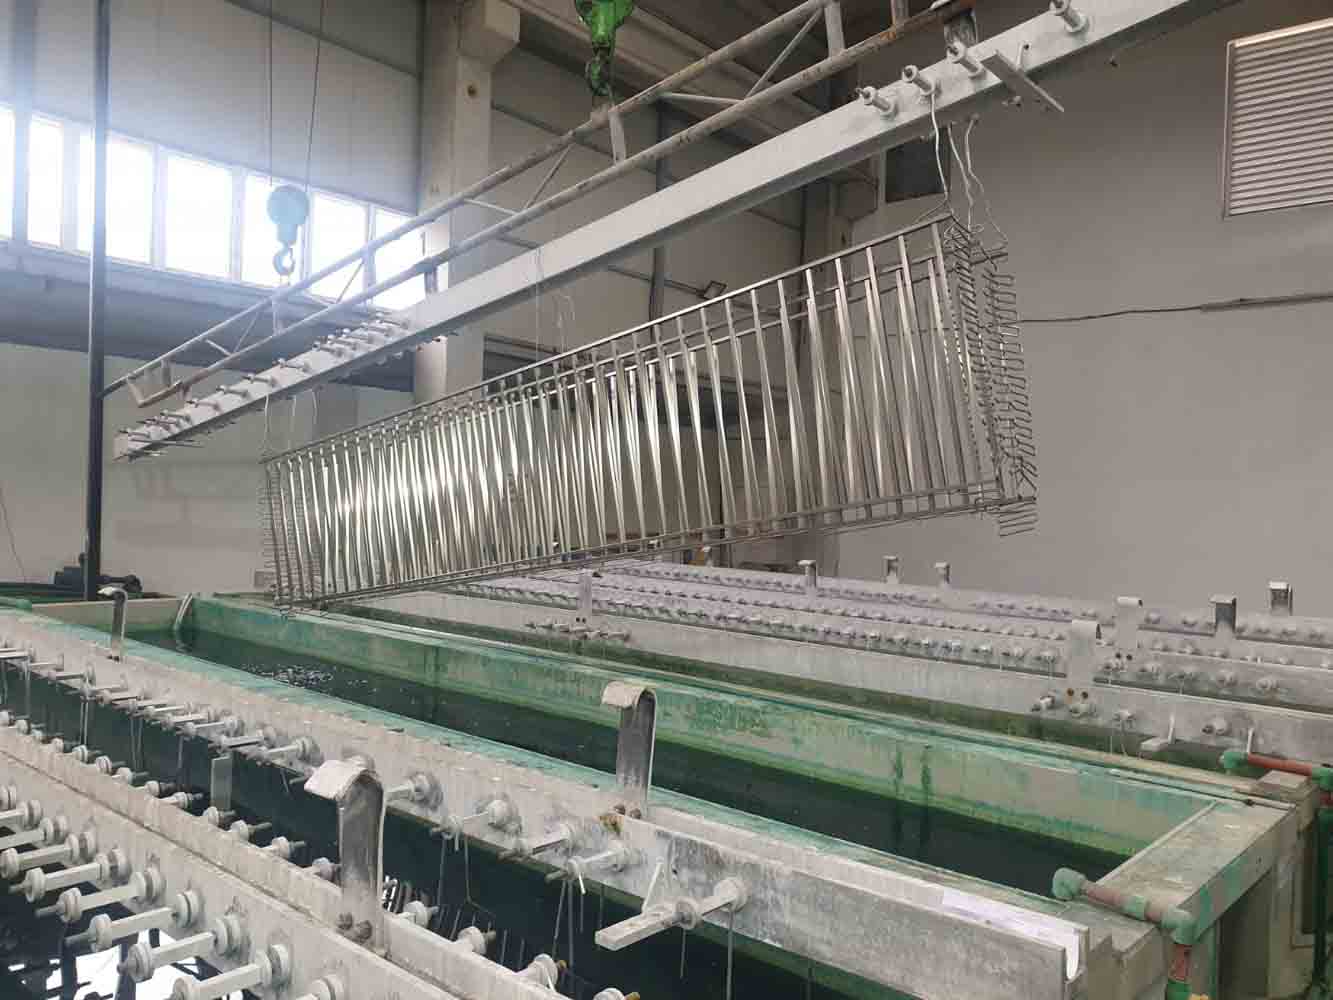 Anodization of aluminum products